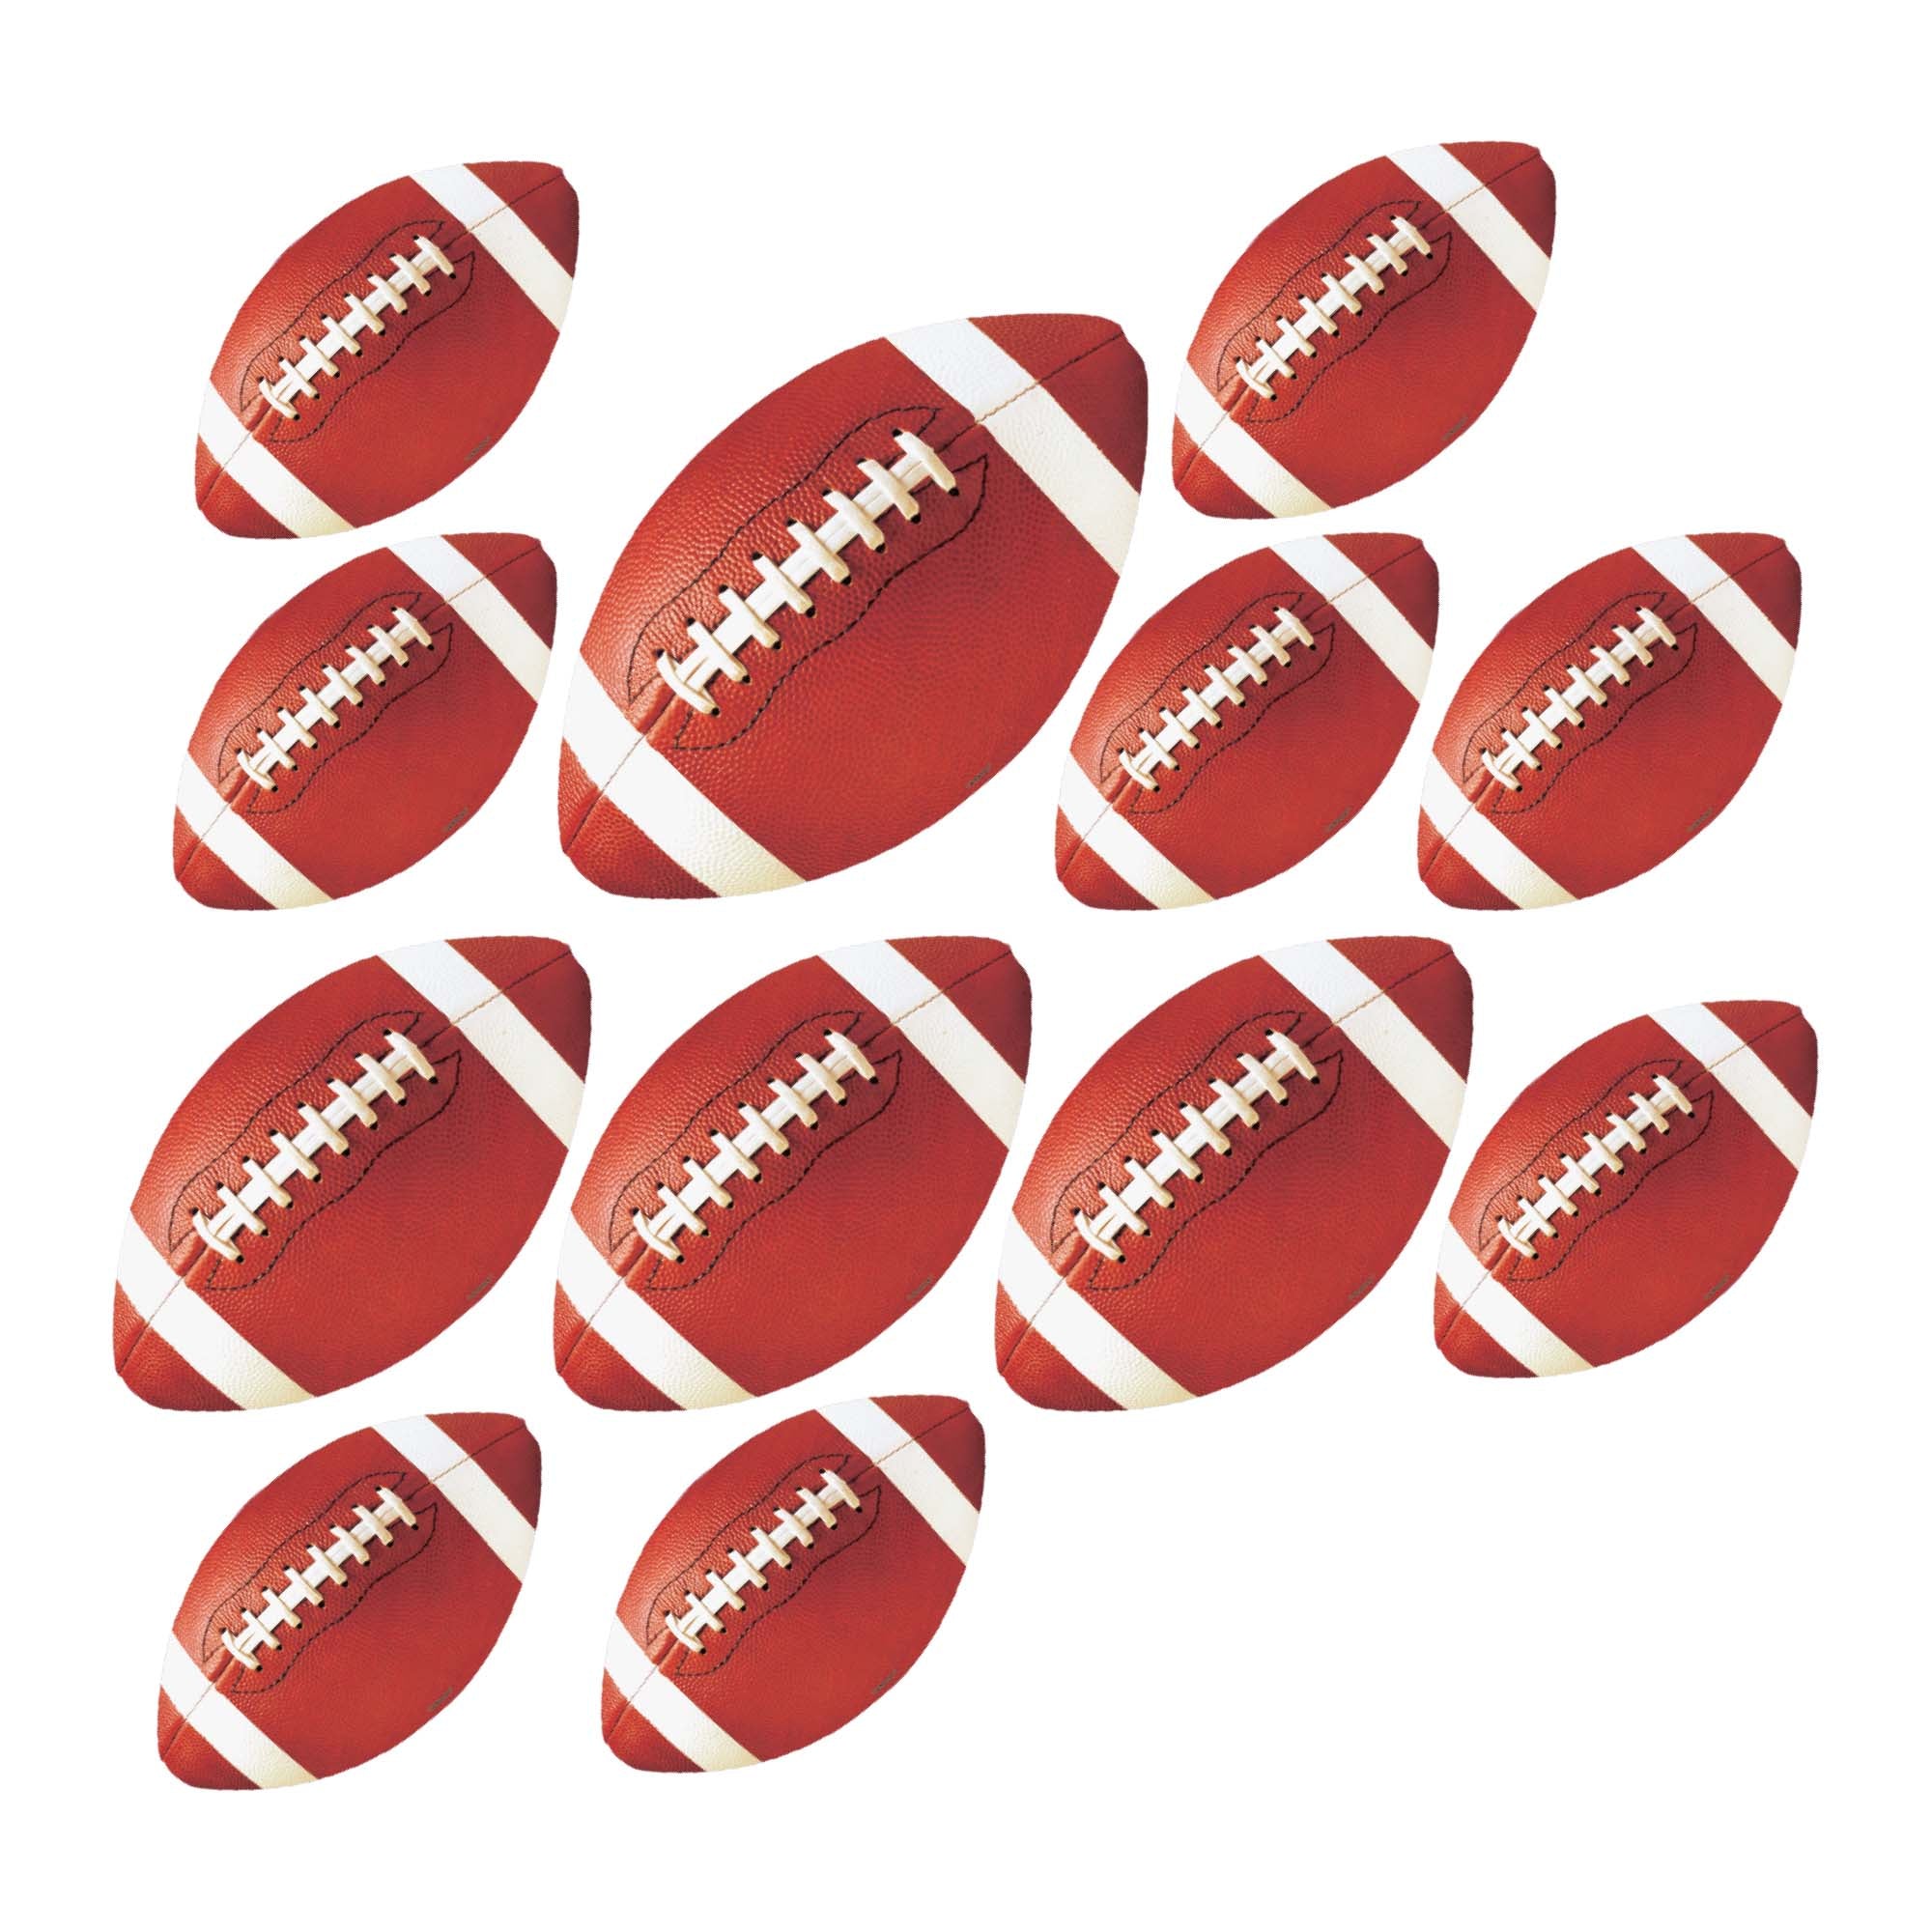 Football 12 Pack Cutouts Assorted 8 1/2", 10 1/2", and 13" size Cutouts